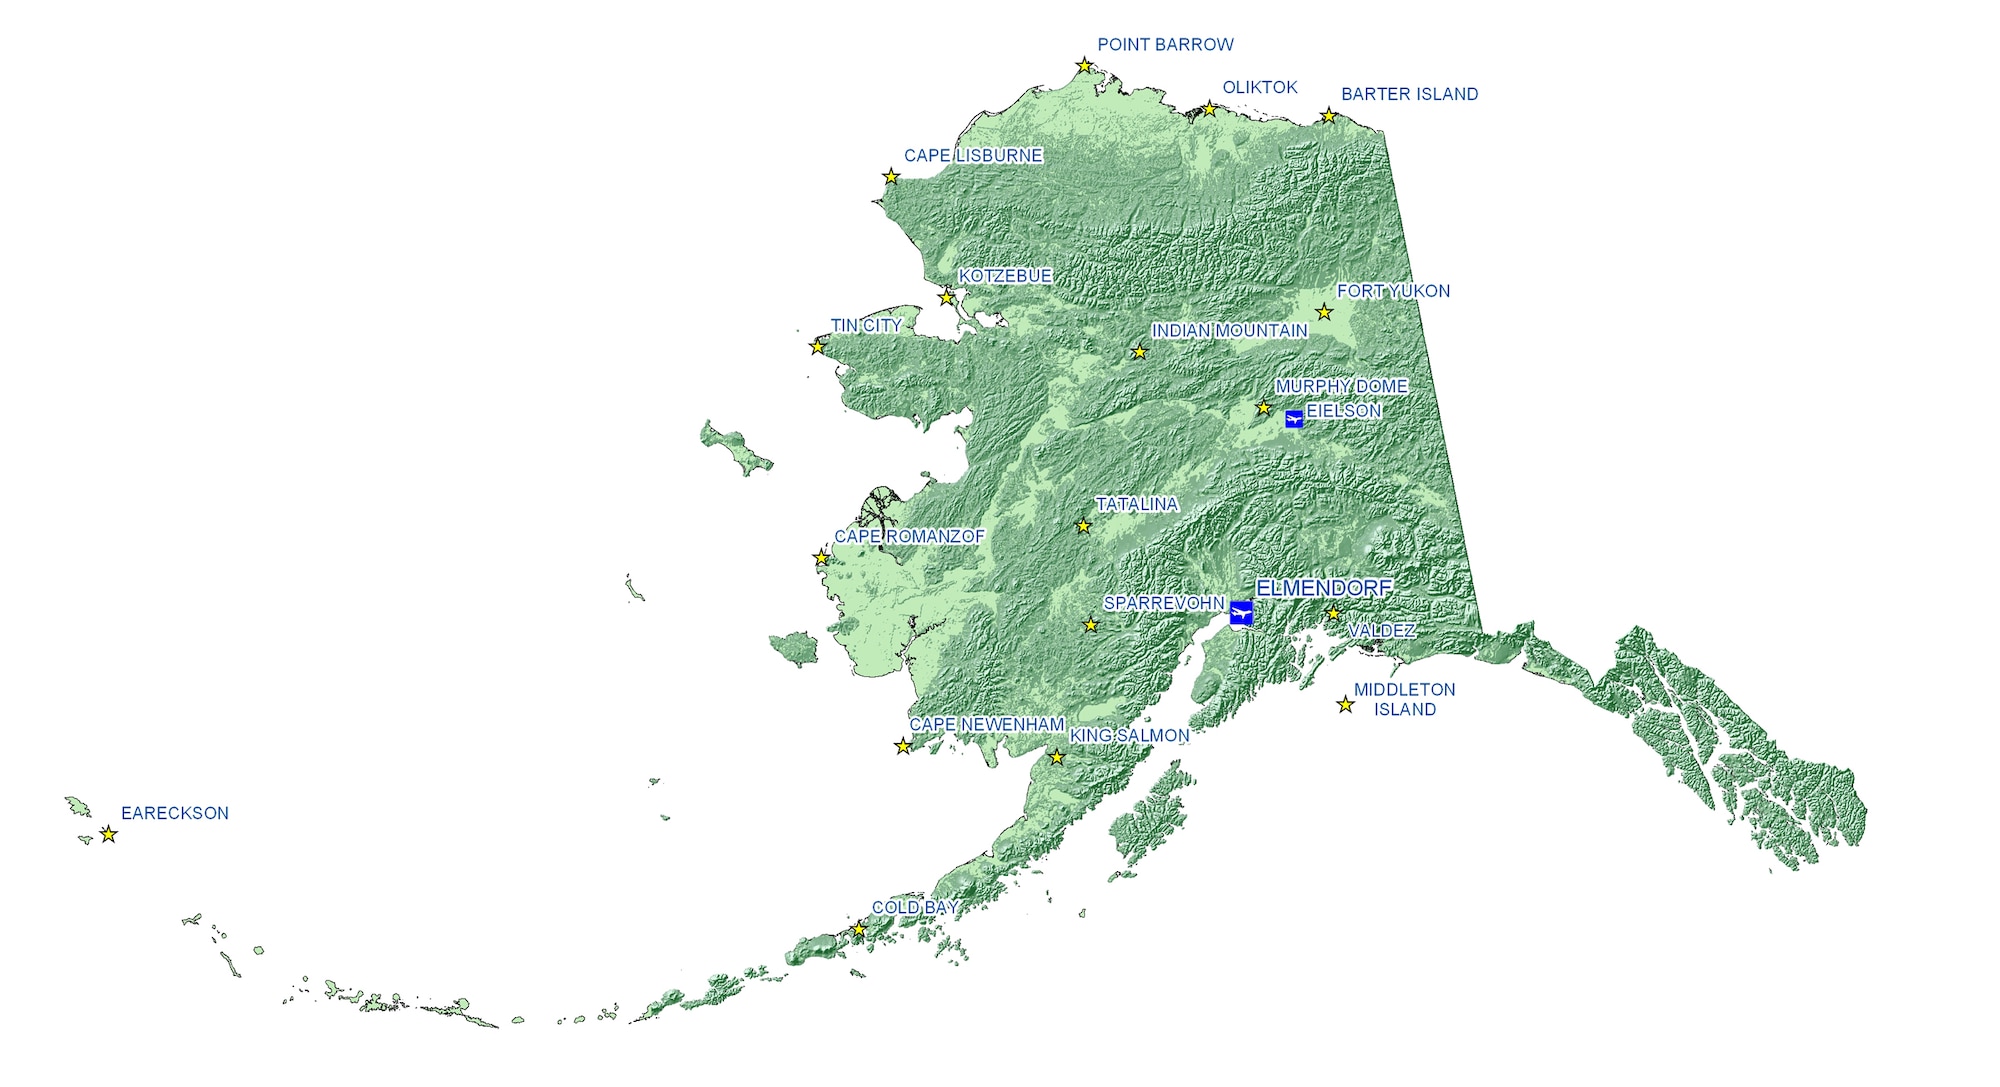 611th Air Support Group is responsible for active sites across all of Alaska (U.S. Air Force graphic)